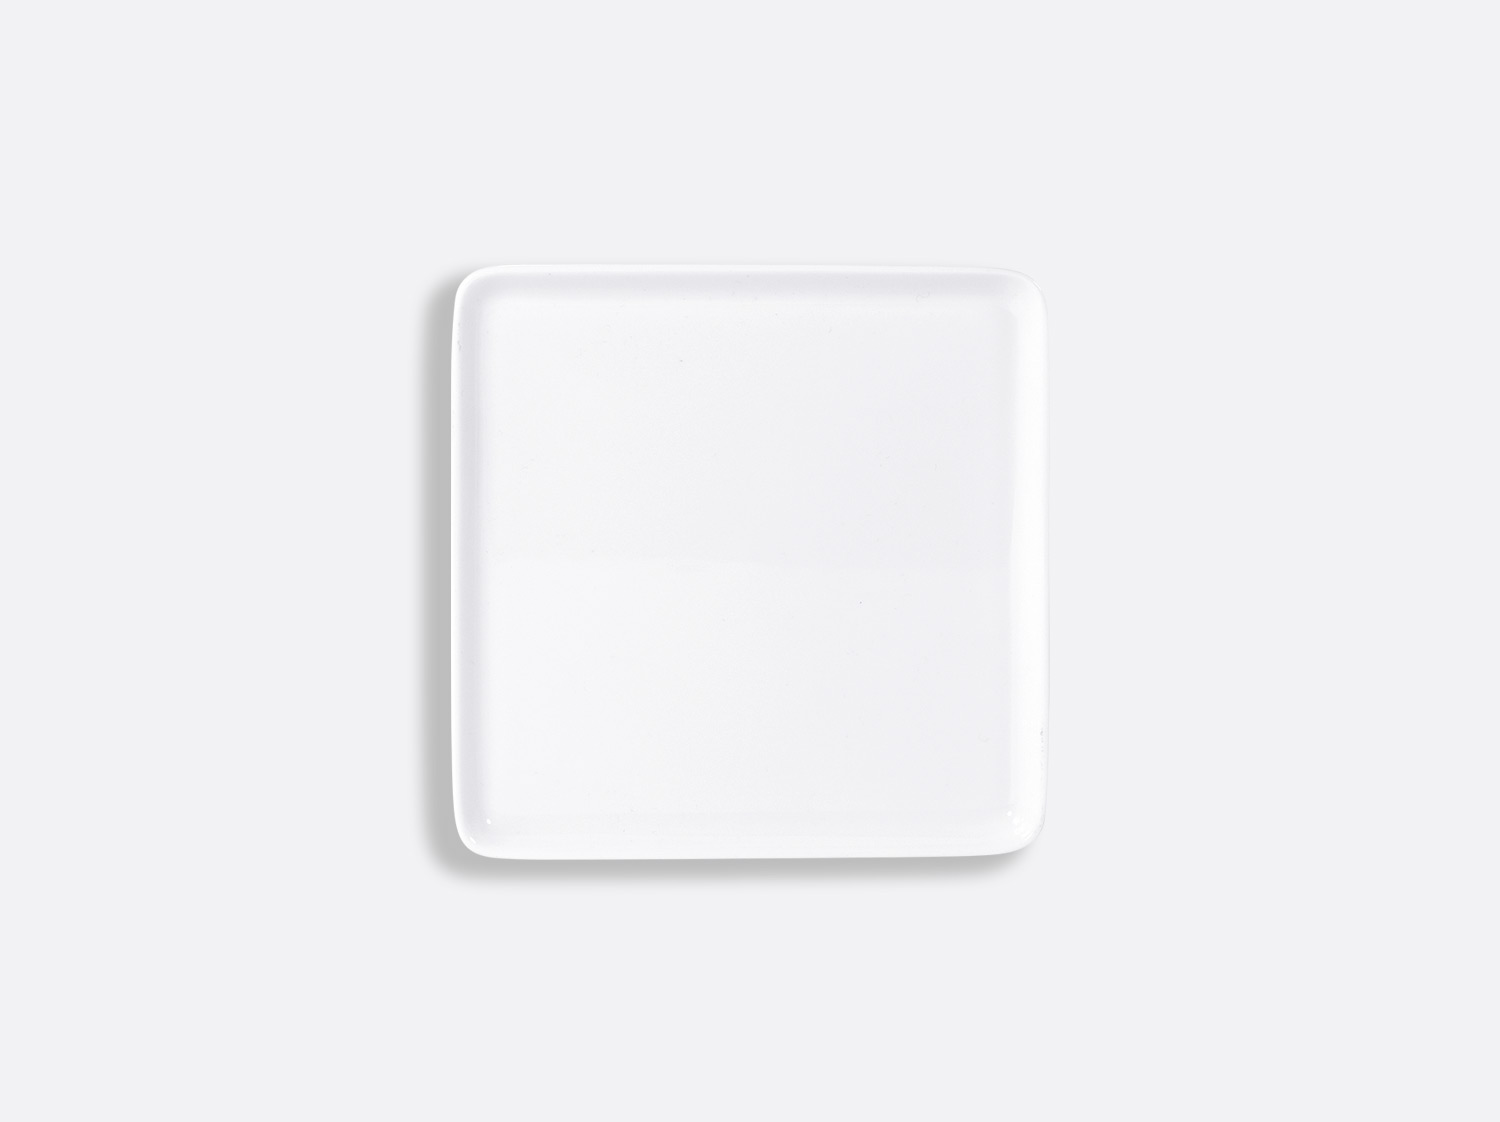 China Bora square plate 13.5 x 13.5 cm of the collection Fantaisies blanches | Bernardaud